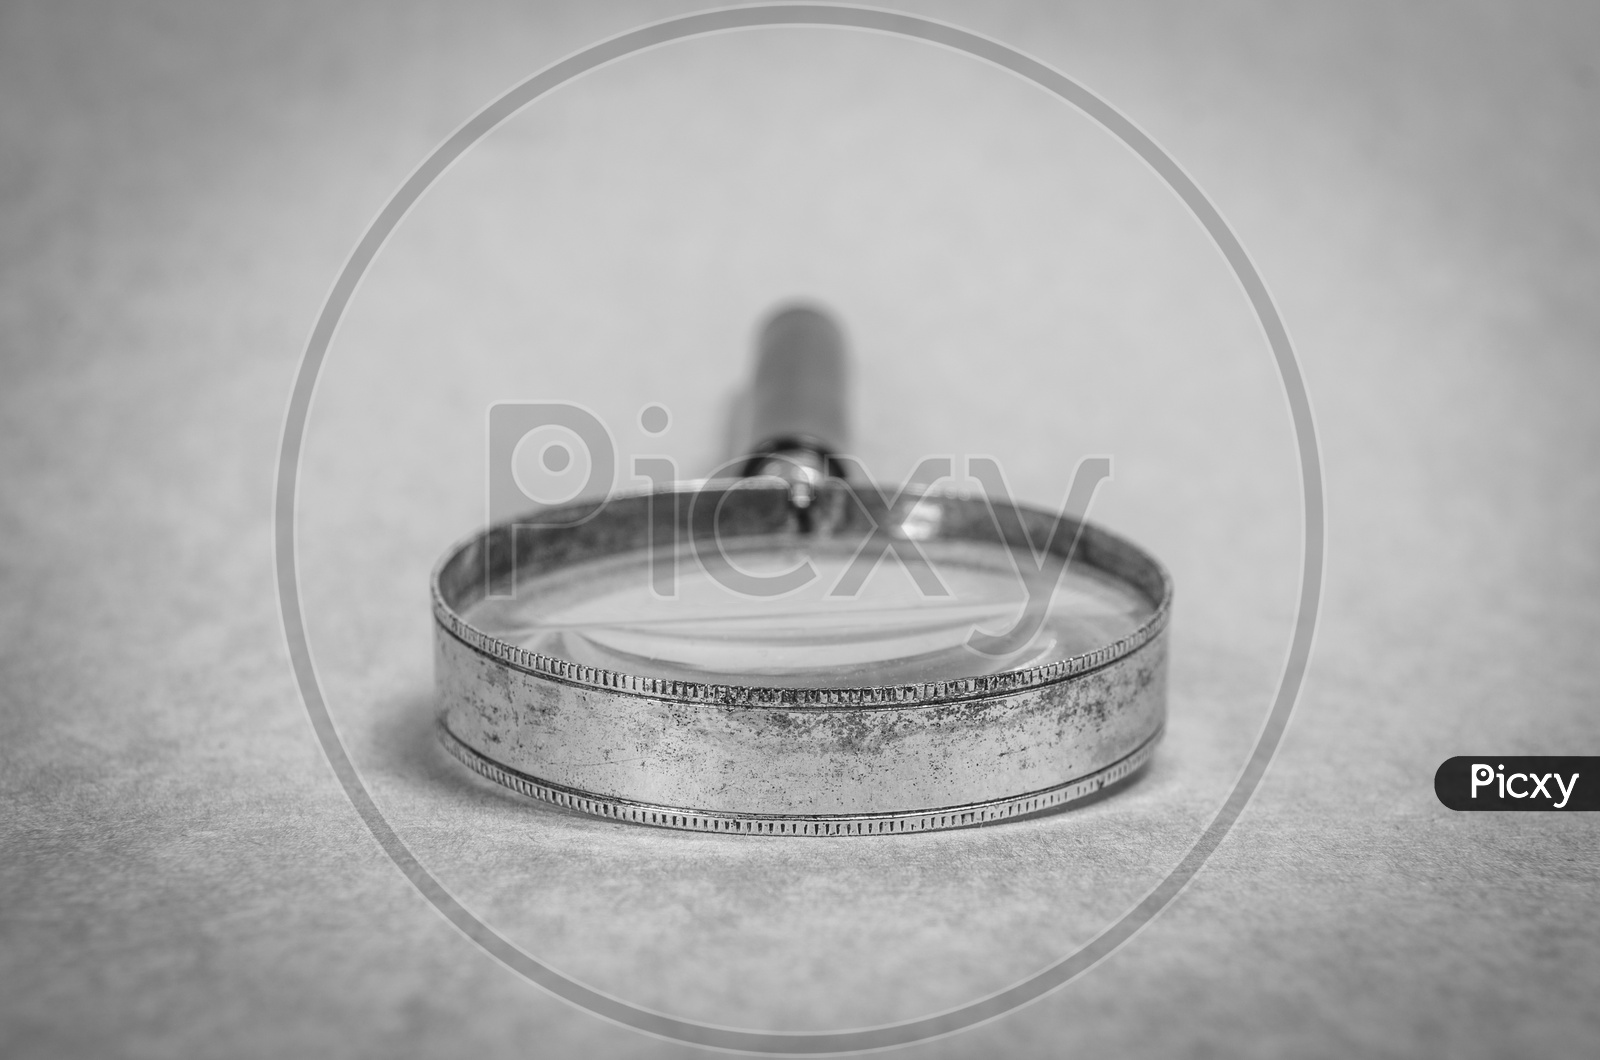 Authentic old metal magnifying glass in black and white